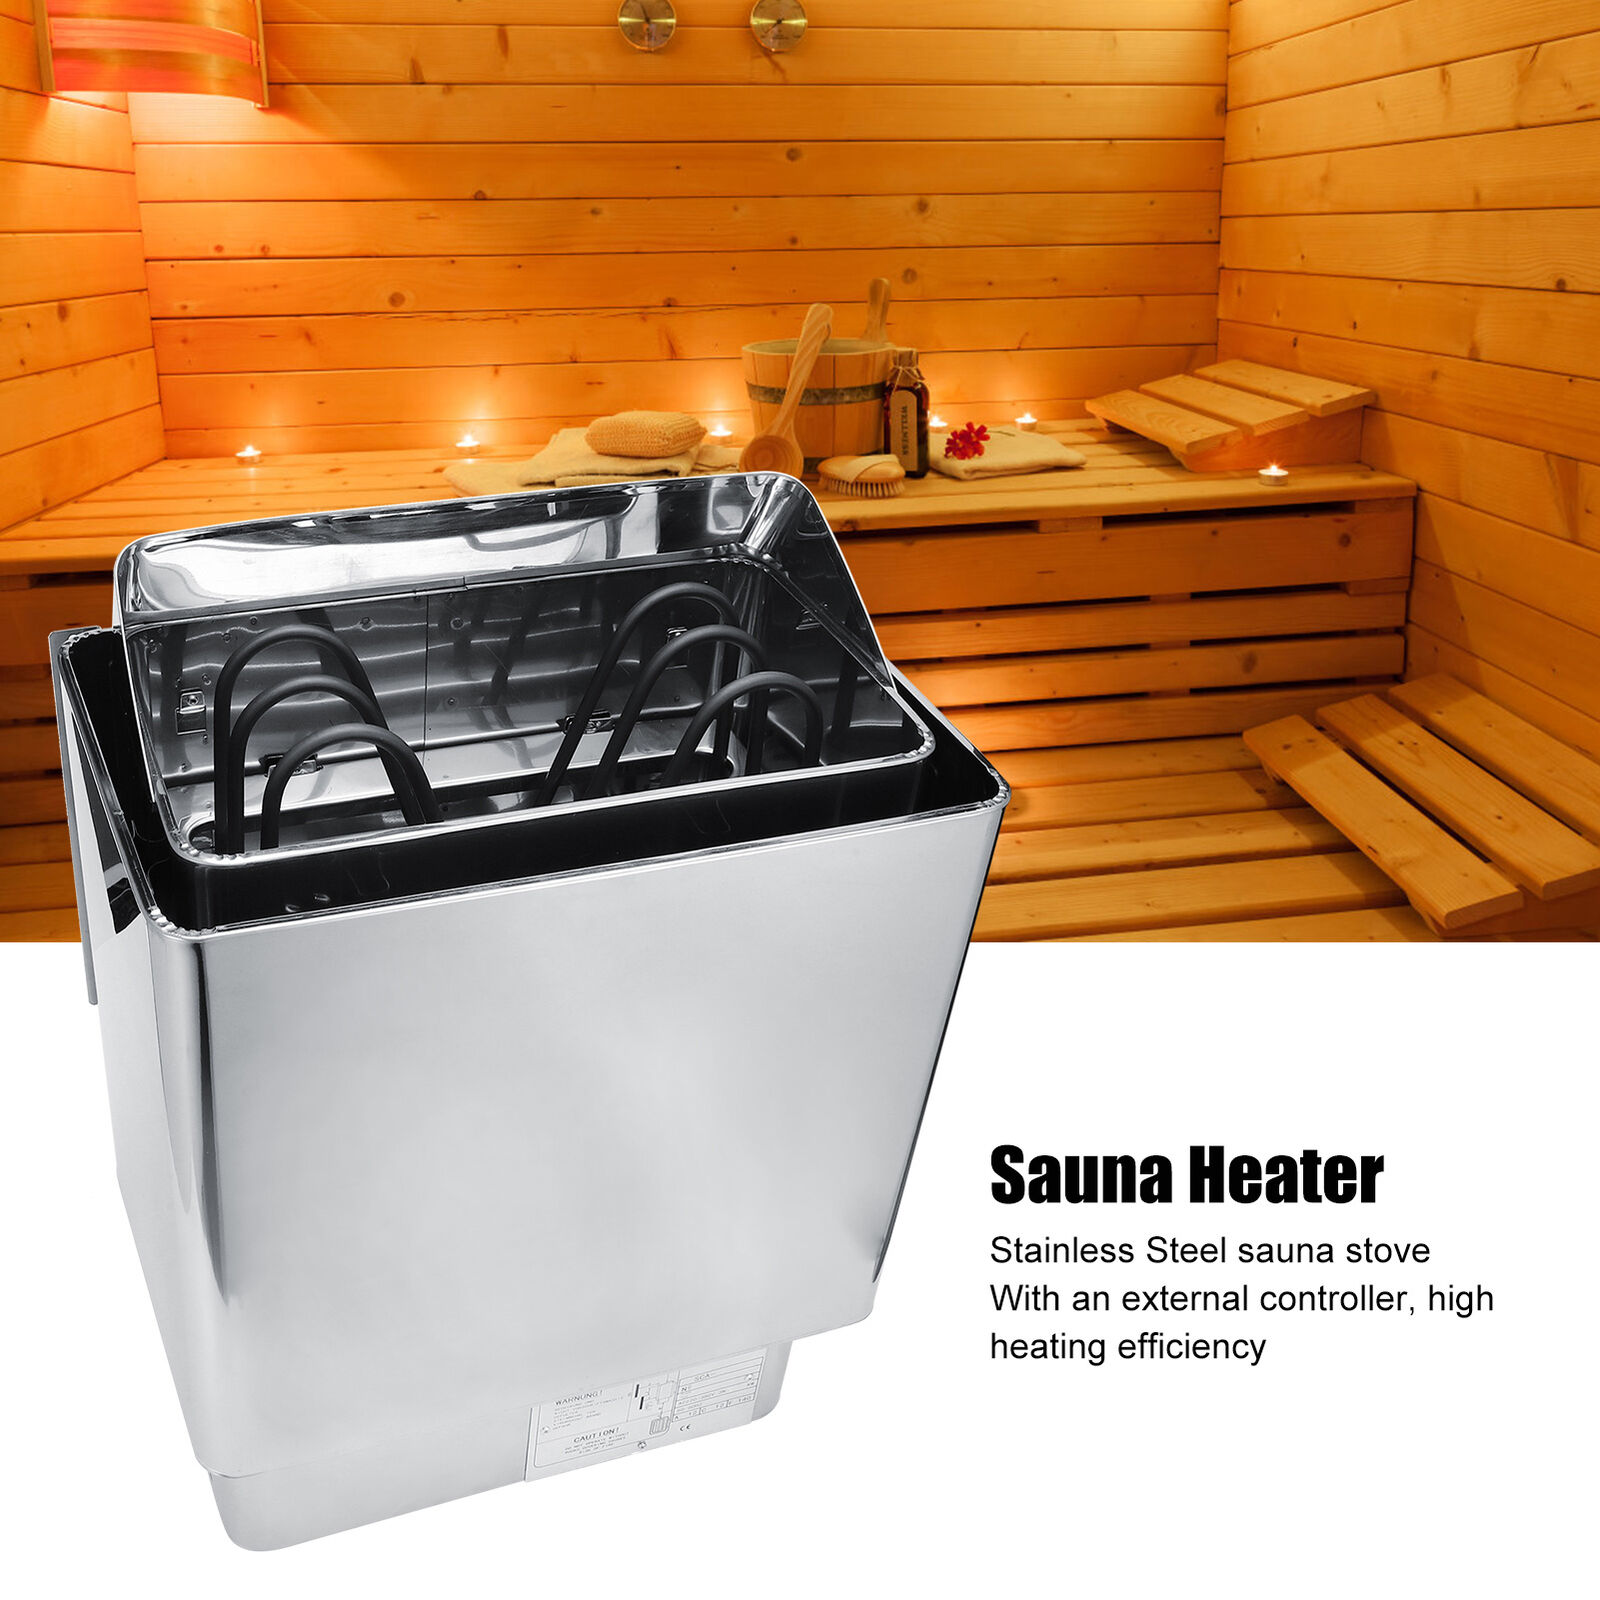 3kw 220v Stainless Steel Dry Sauna Heater Stove Spa With External Controller